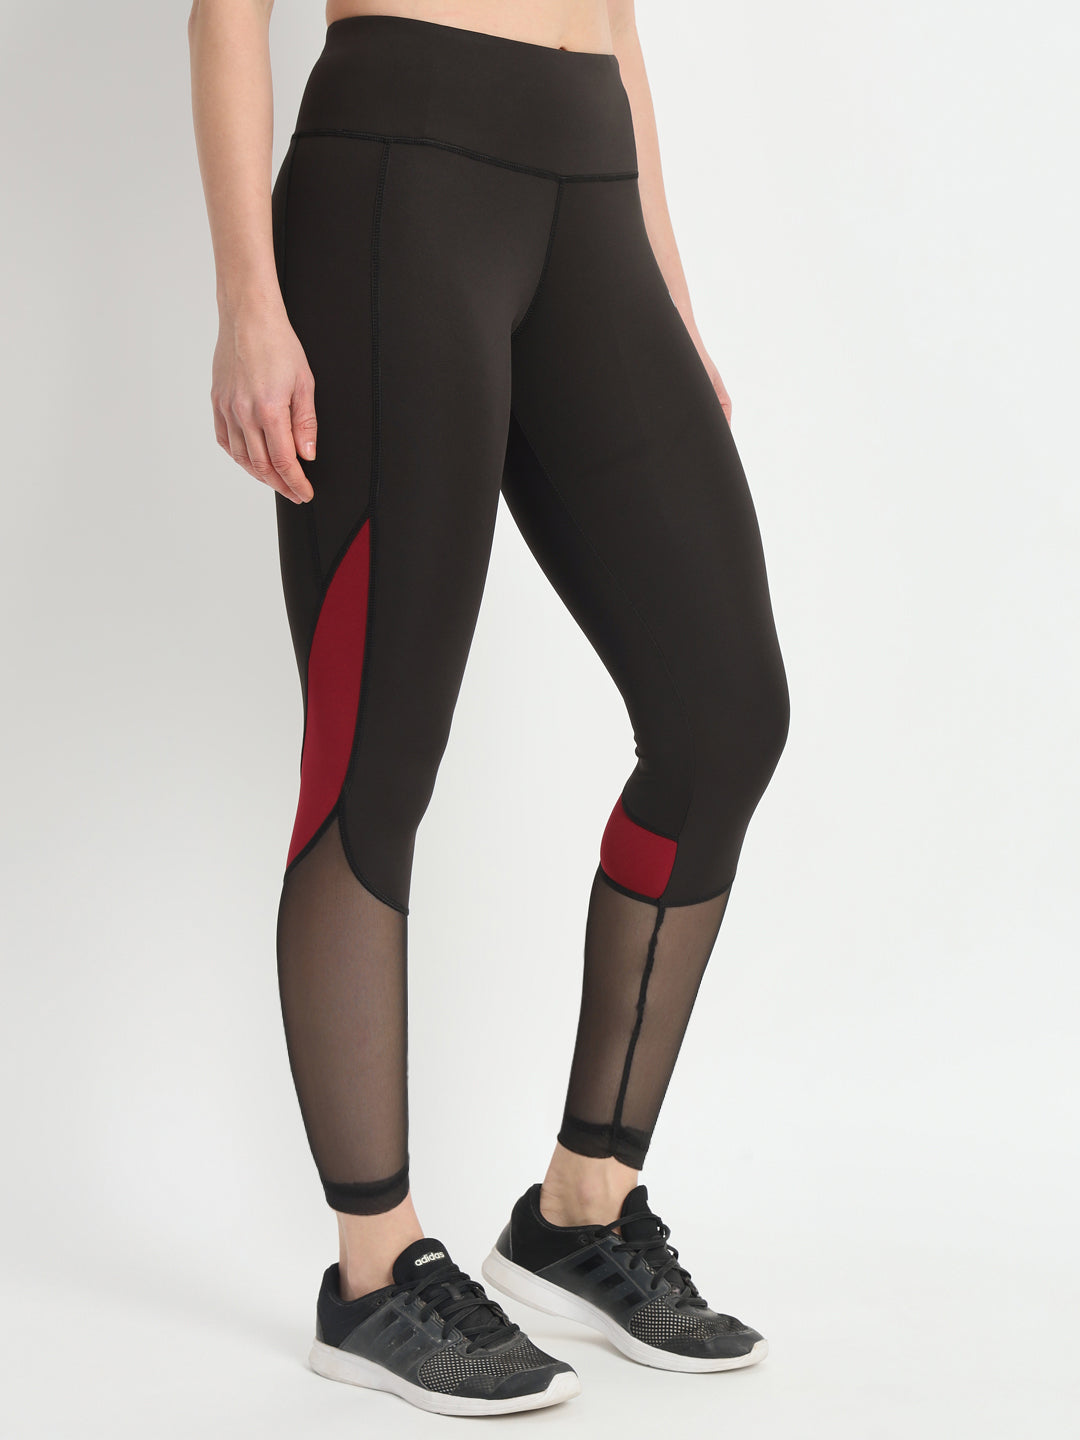 Bone-Dry High Rise Tight With Mesh At The Bottom In Front-Black